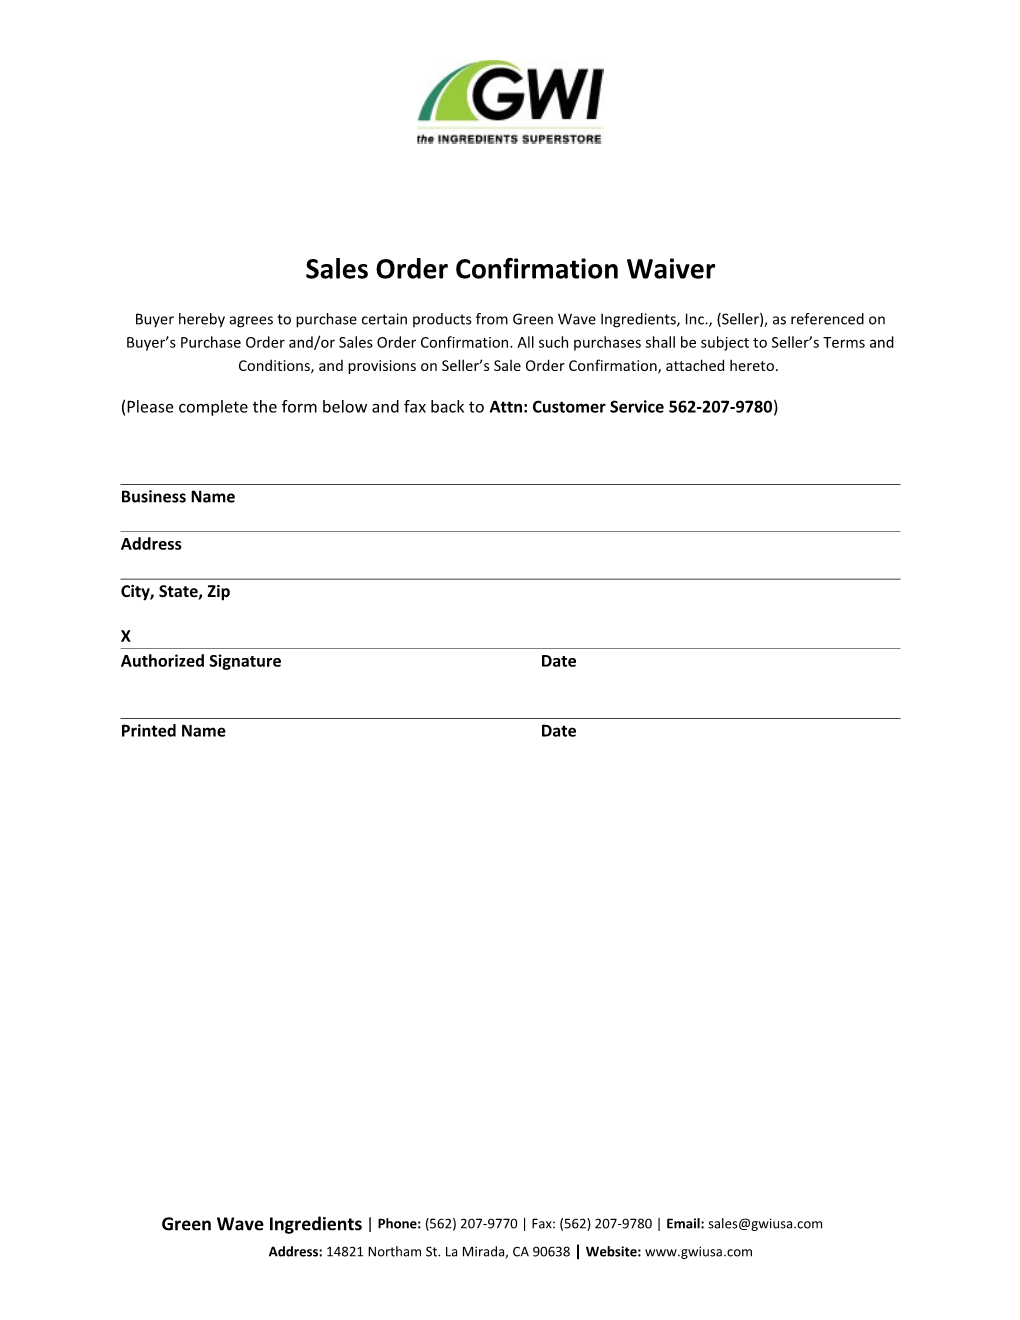 Sales Order Confirmation Waiver